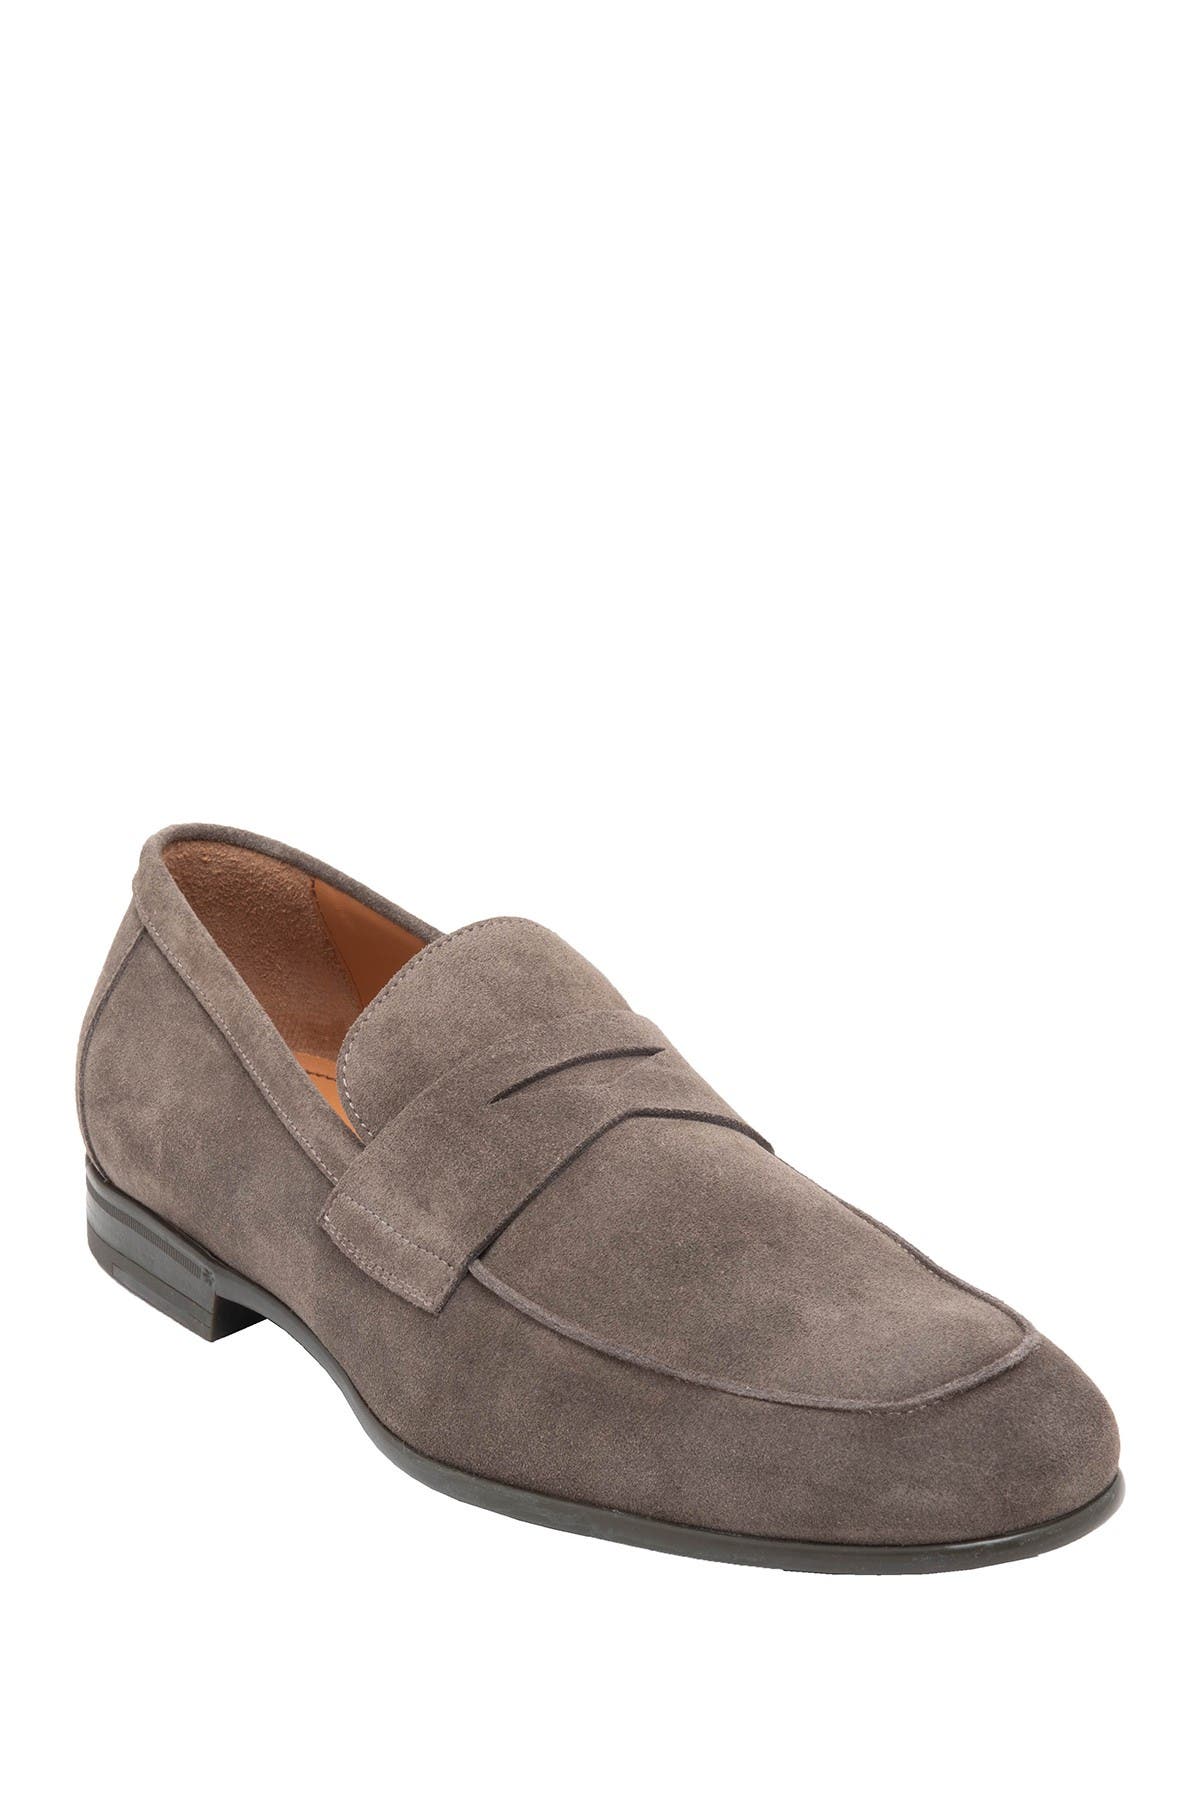 Bruno Magli | Tino Suede Penny Loafer | Nordstrom Rack